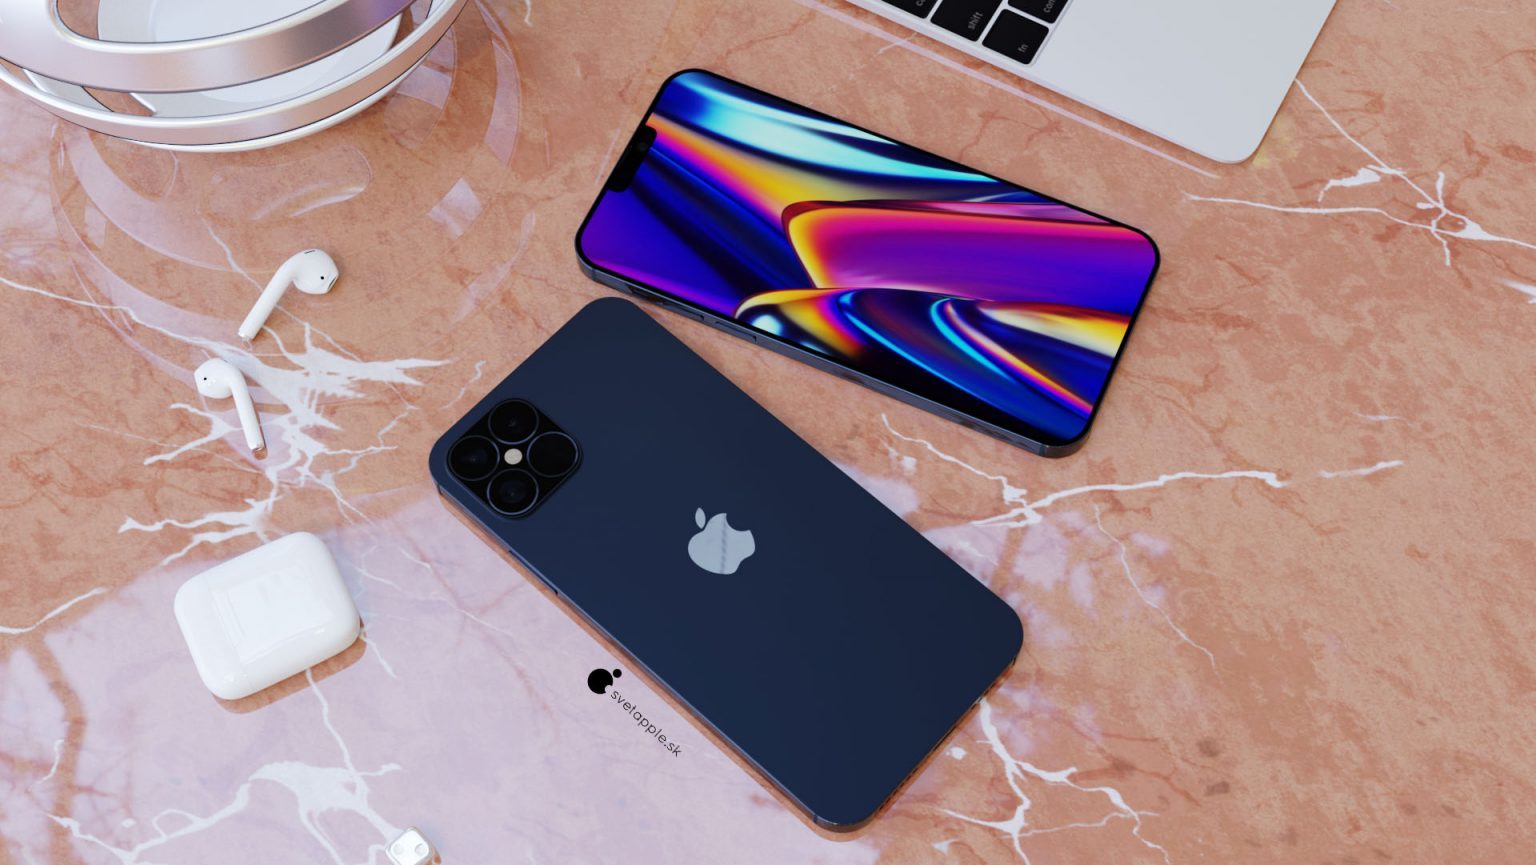 Iphone 12 Renders Show Off The Rumored Navy Blue Color And Flat Edges